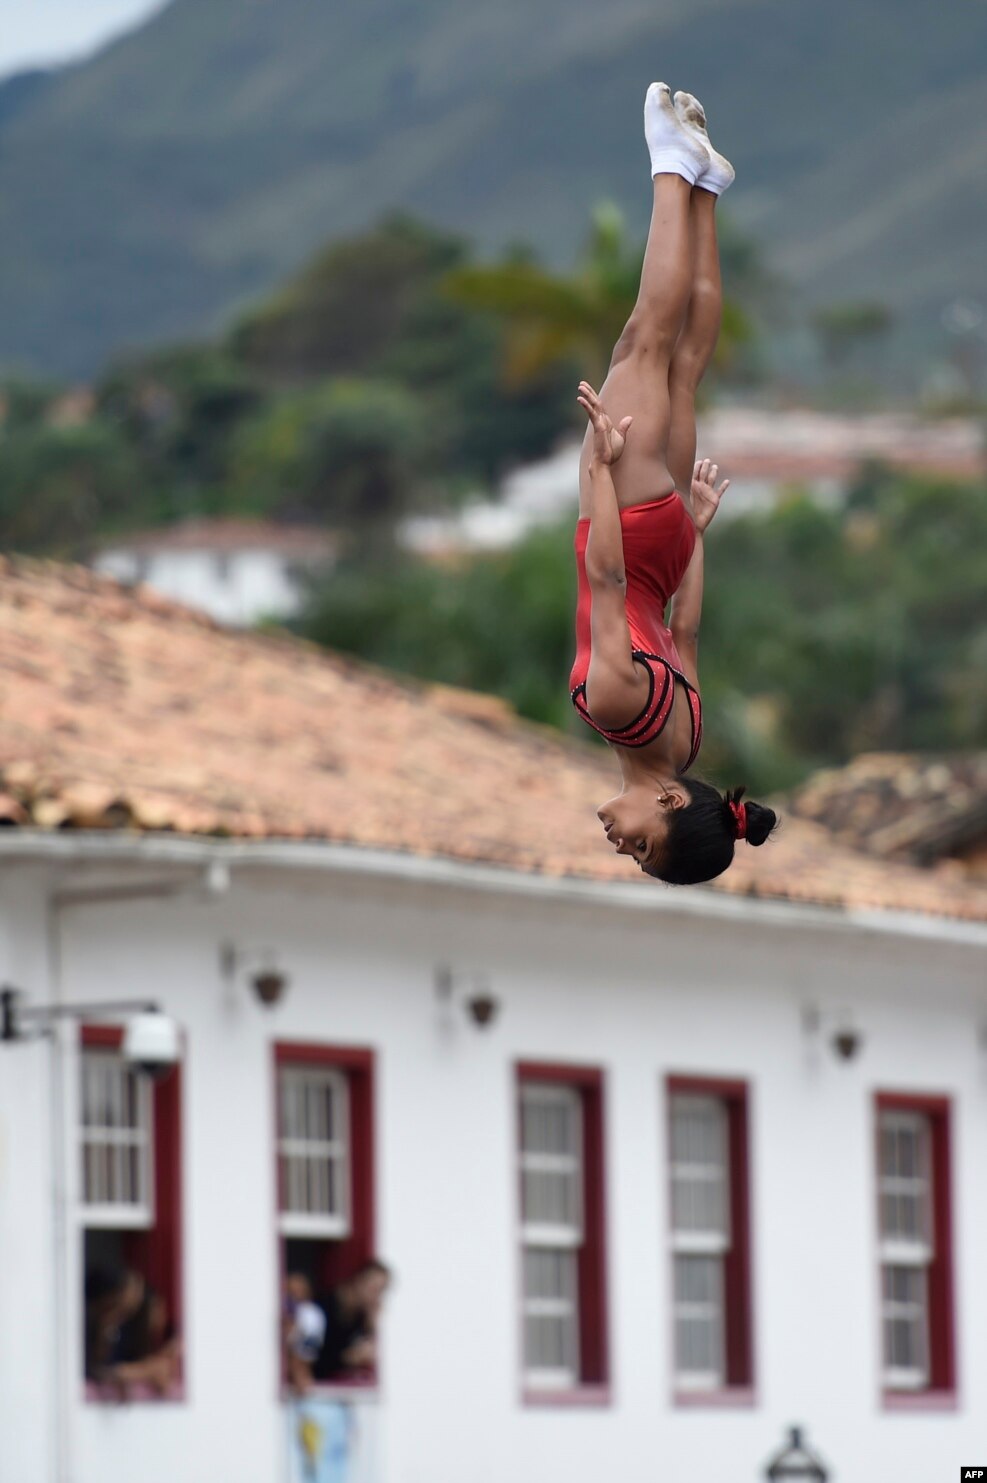 Children of the Aleijadinho Foundation practice with trampoline during celebrations for the arrival of the Olympic torch in Ouro Preto historic city in Minas Gerais, Brazil.